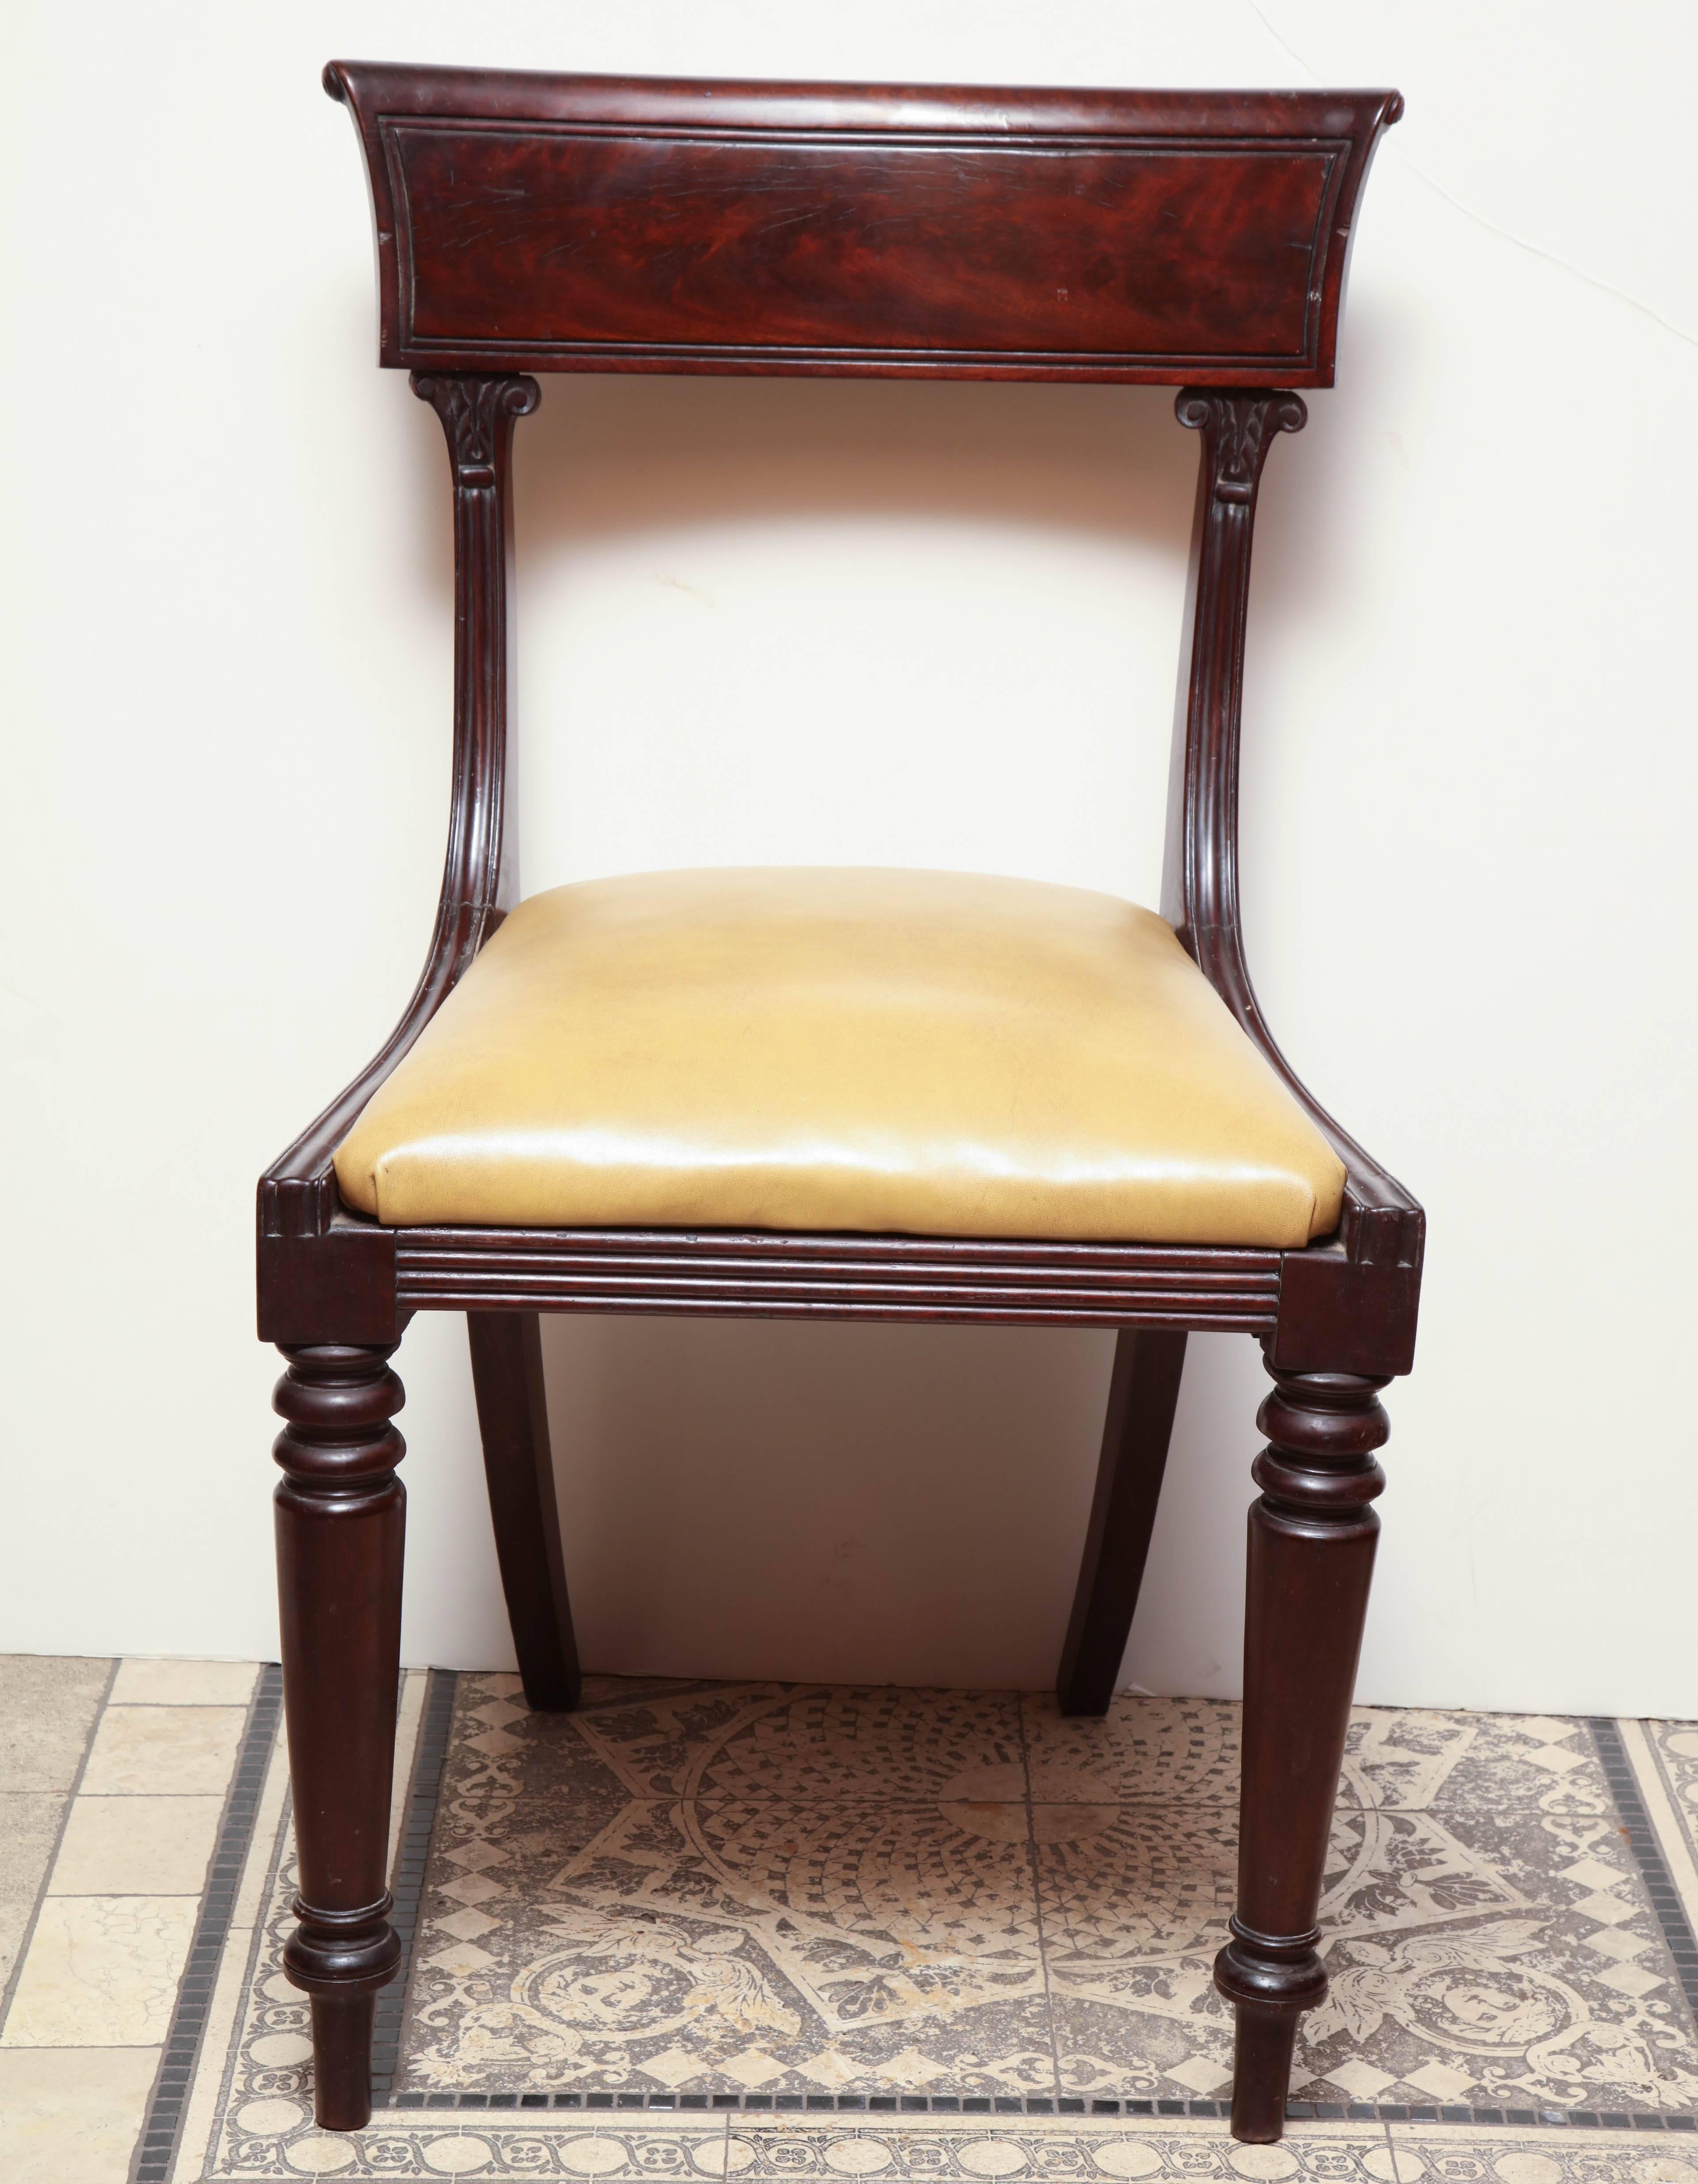 A set of eight American Classical mahogany dining chairs with reeding and turned and tapered legs.